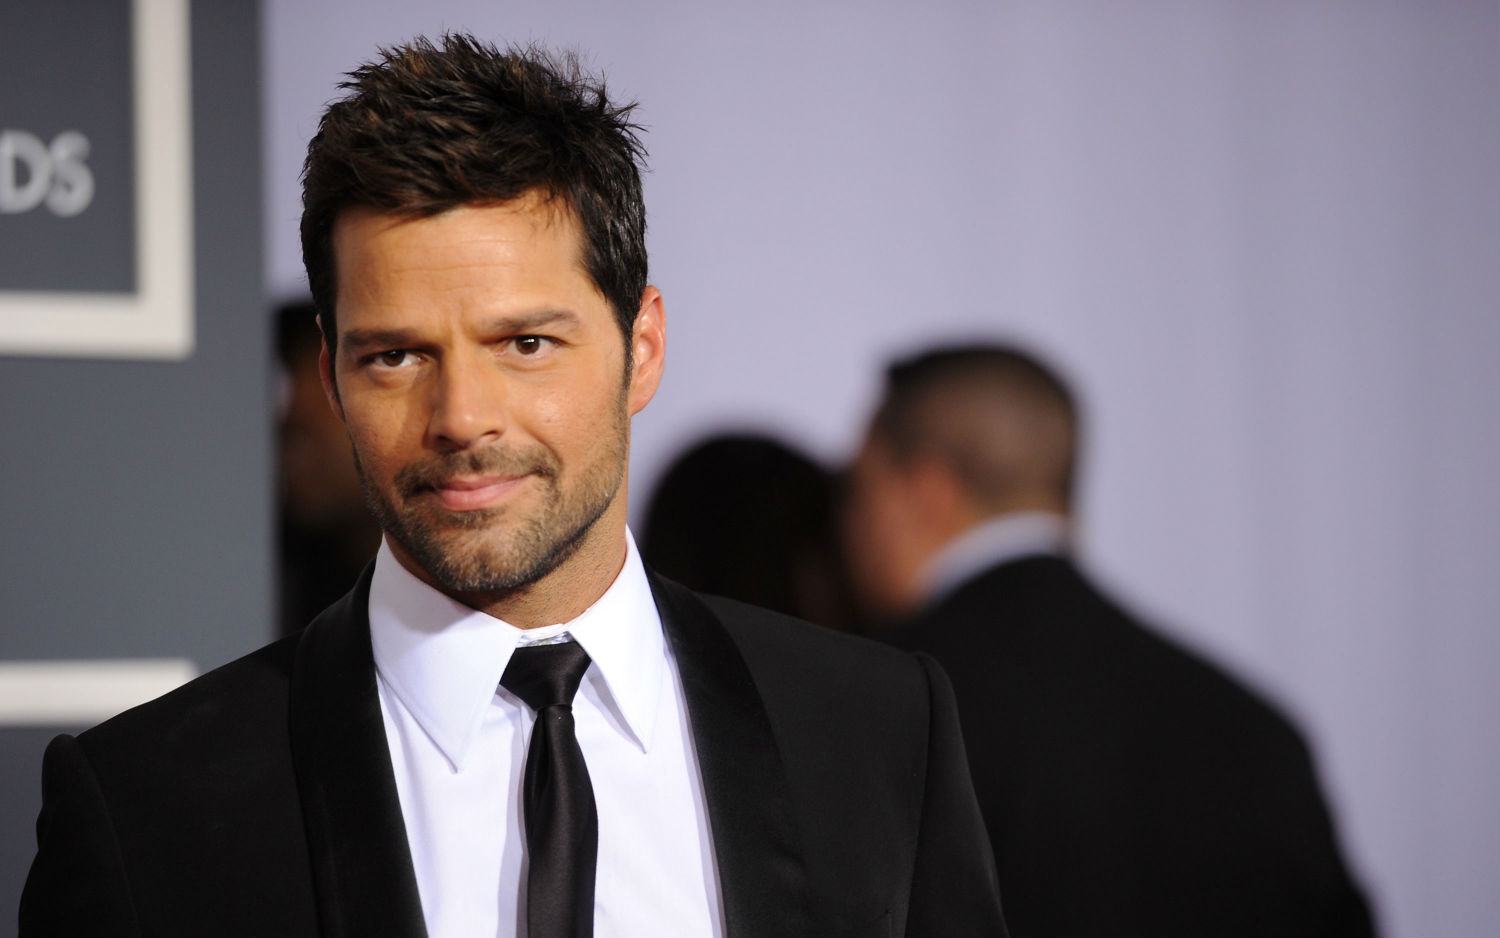 Ricky Martin1 GettyImages-109066397